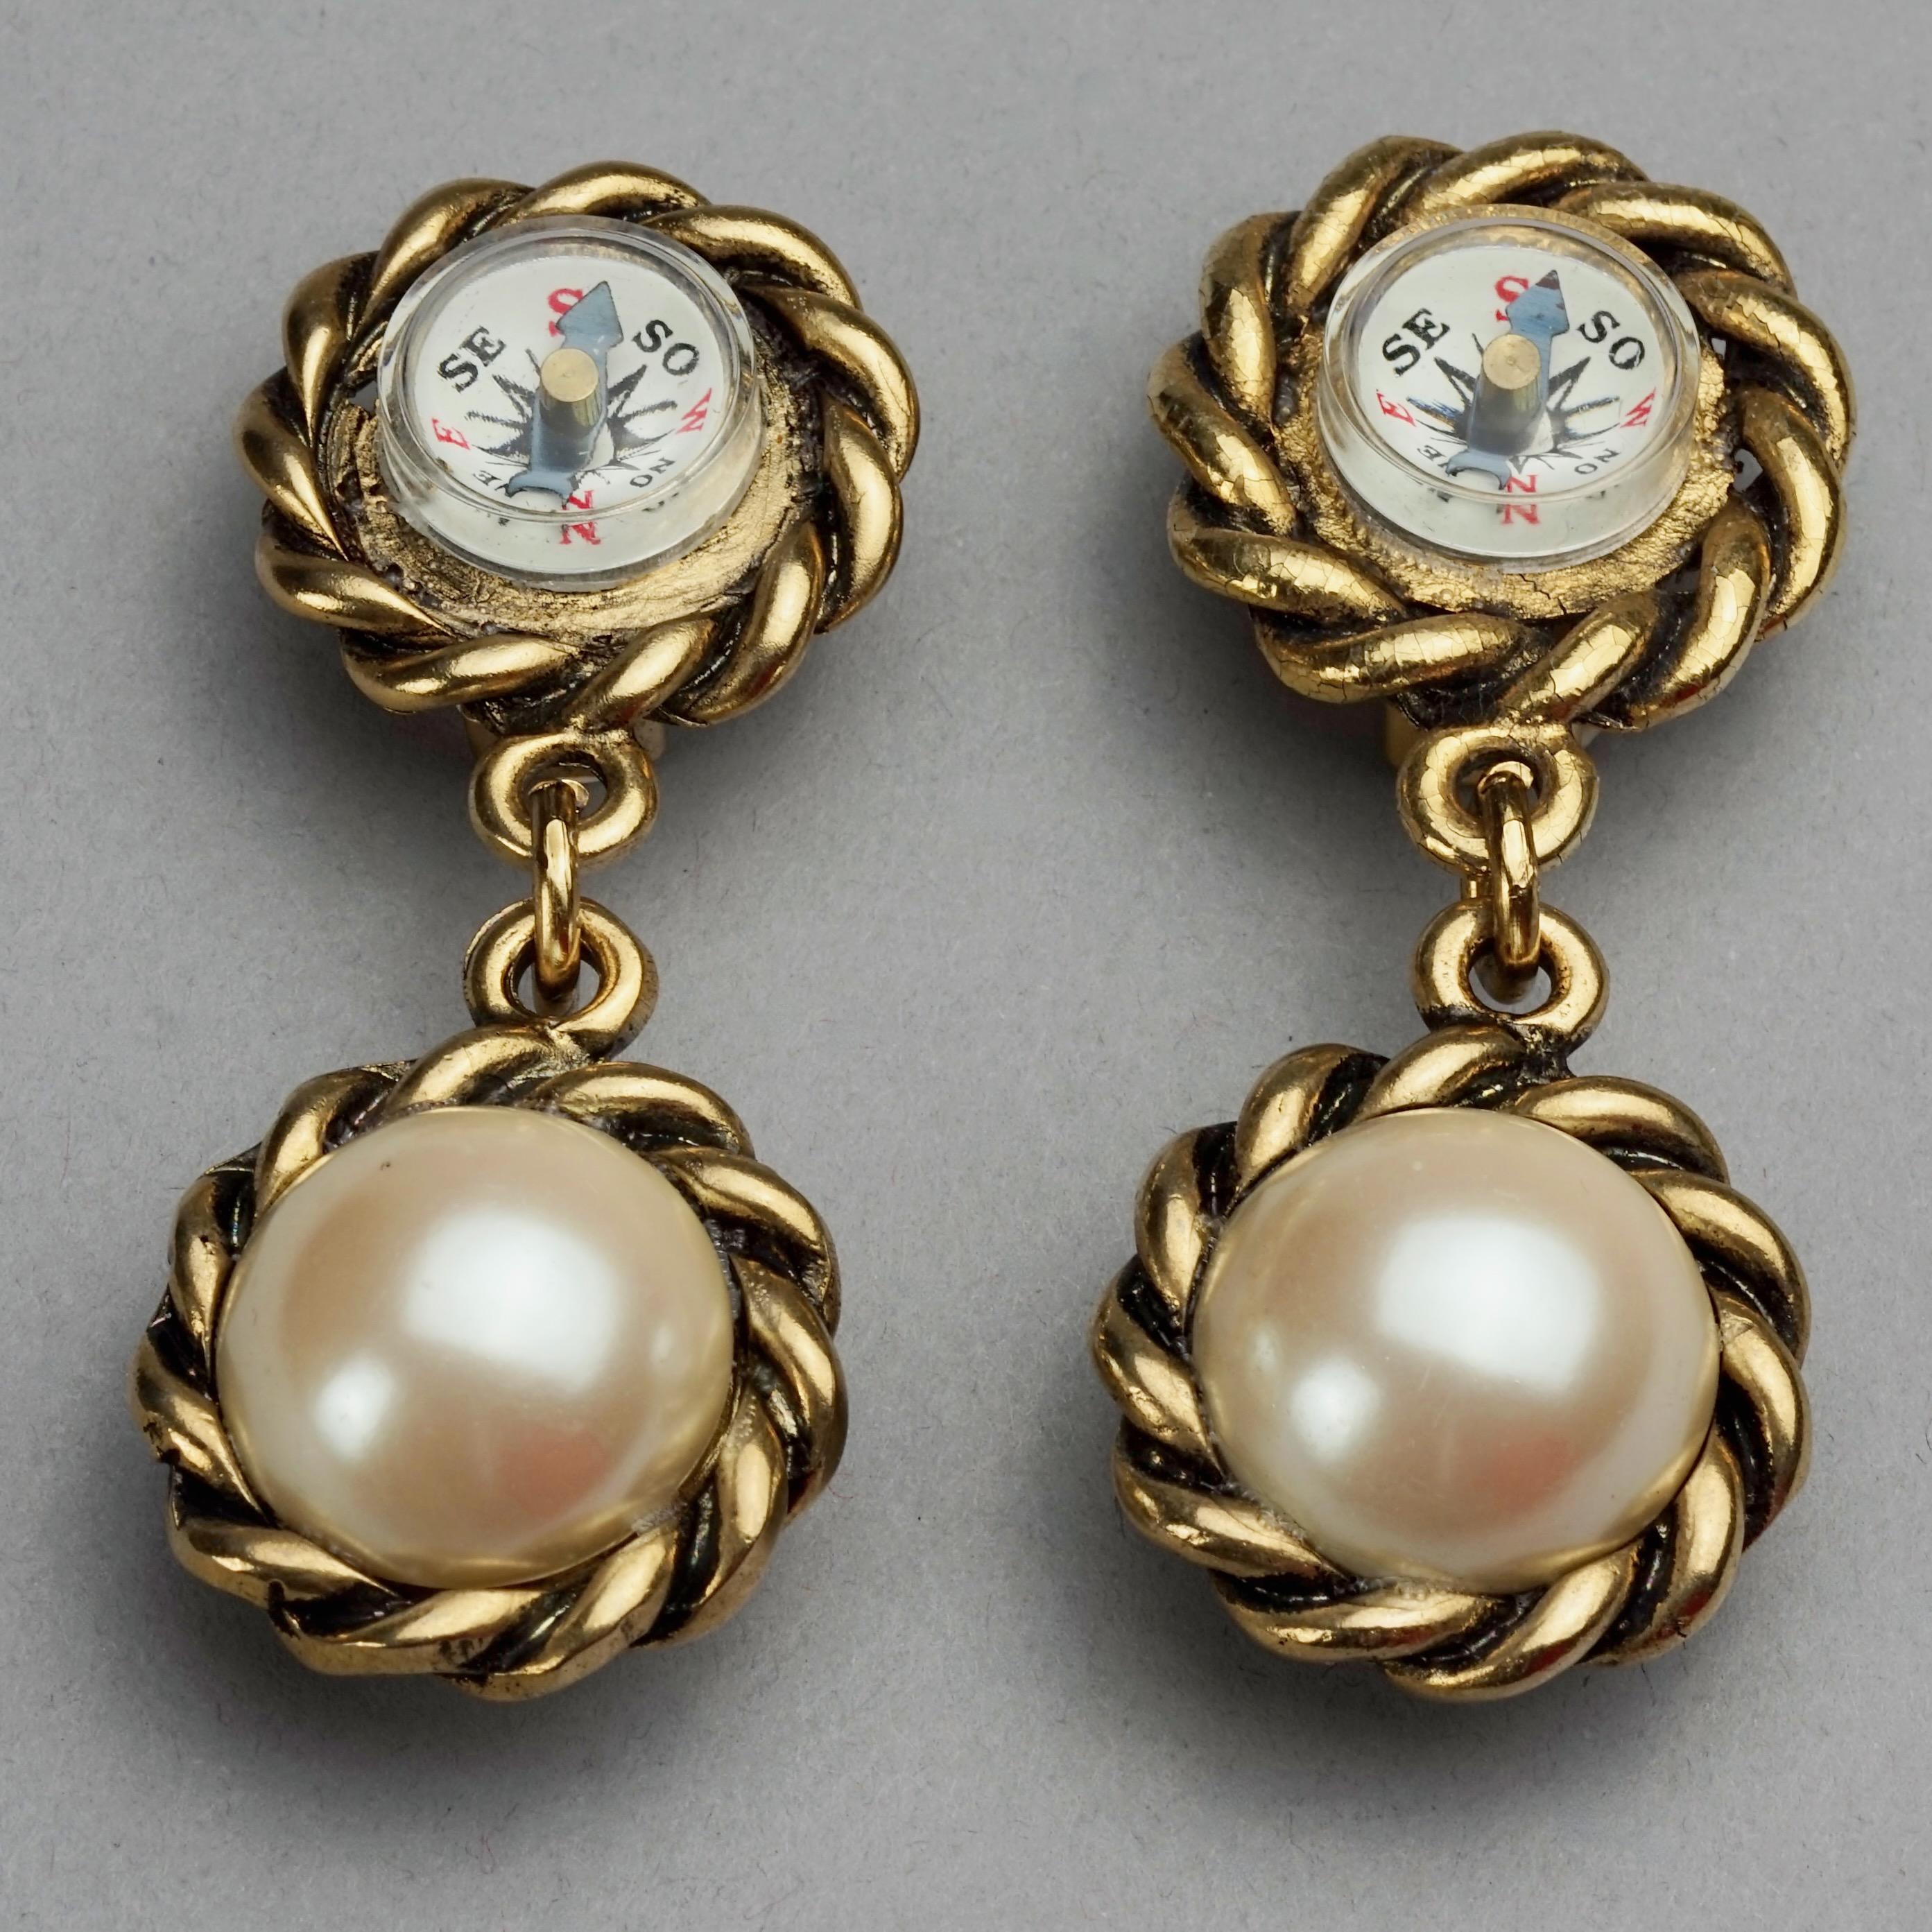 Vintage MOSCHINO Compass Pearl Novelty Dangling Earrings In Good Condition For Sale In Kingersheim, Alsace